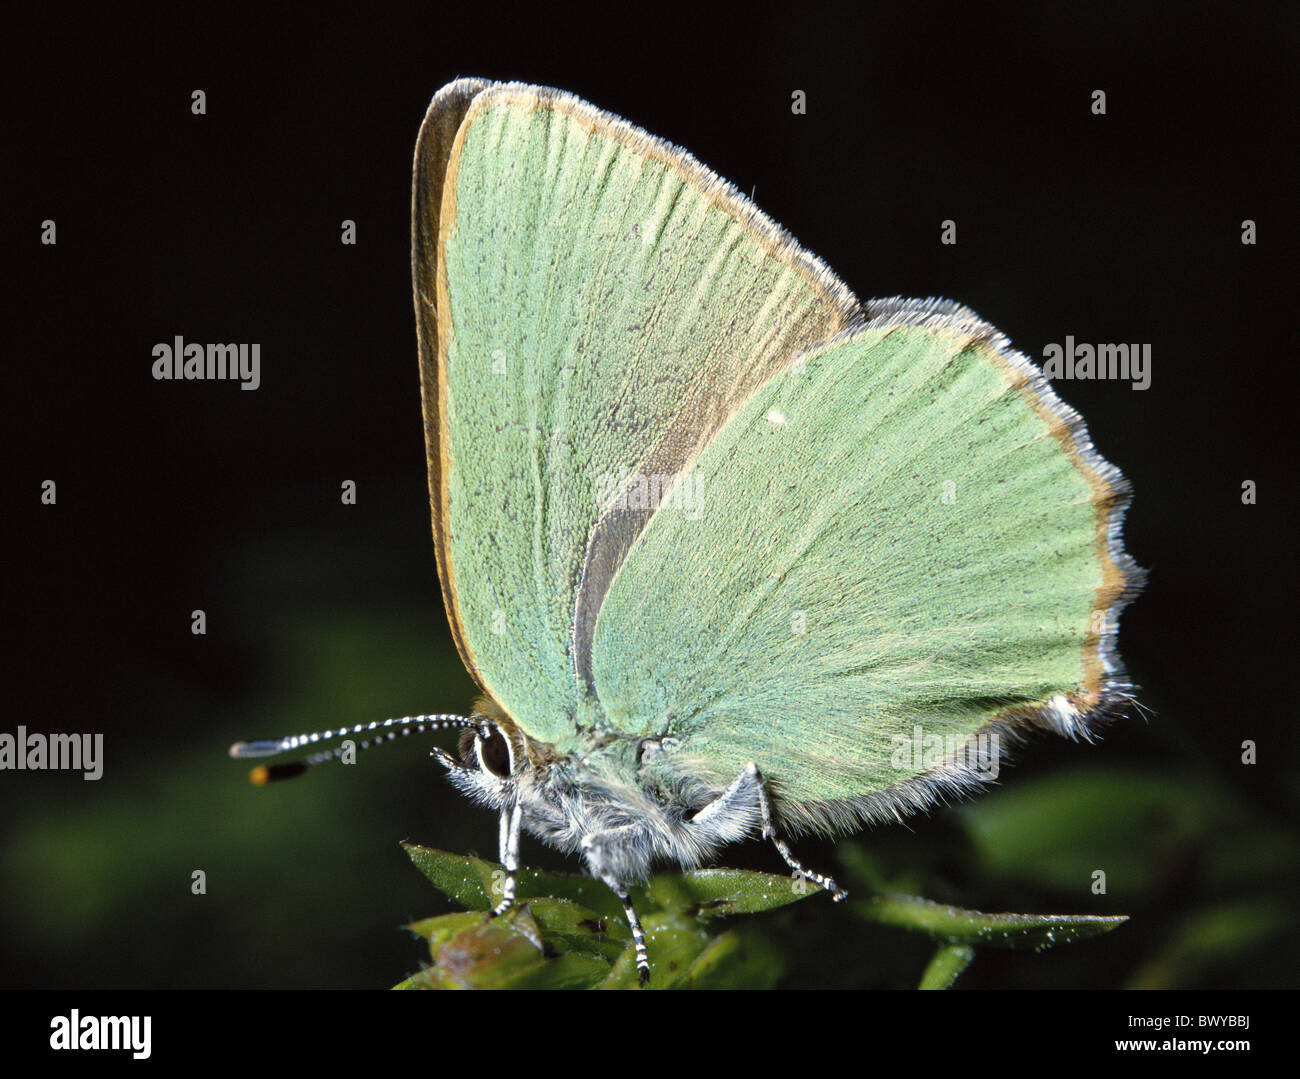 bud green hairstreak butterfly Callophrys rubi green wing butterfly insect Stock Photo